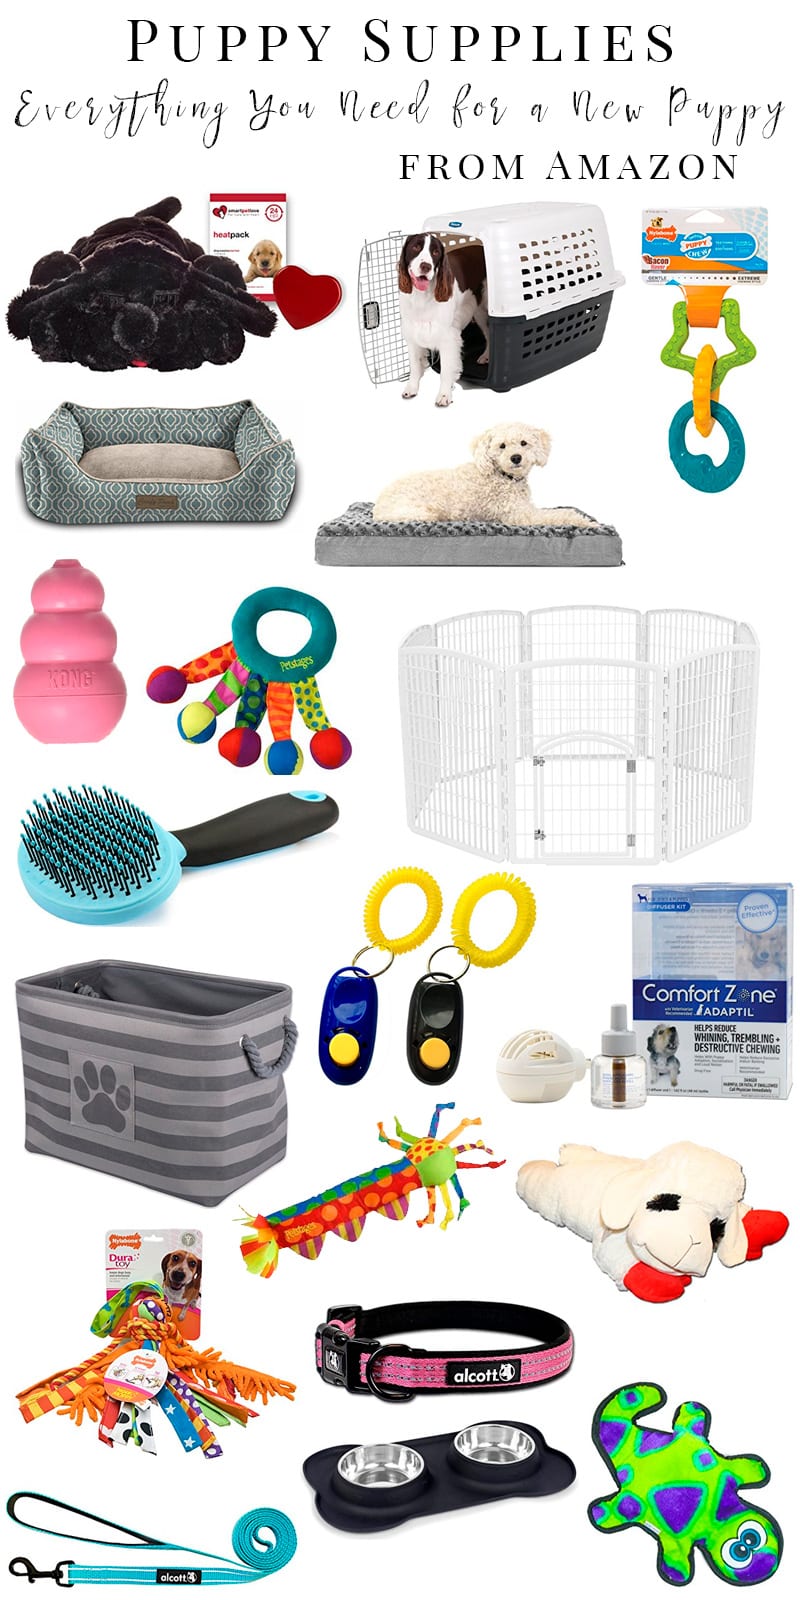 Puppy Supplies - Everything you need for a new puppy. I brought home a new standard poodle puppy this week! Puppies are like babies in that you need to do a lot to prepare your home for them.